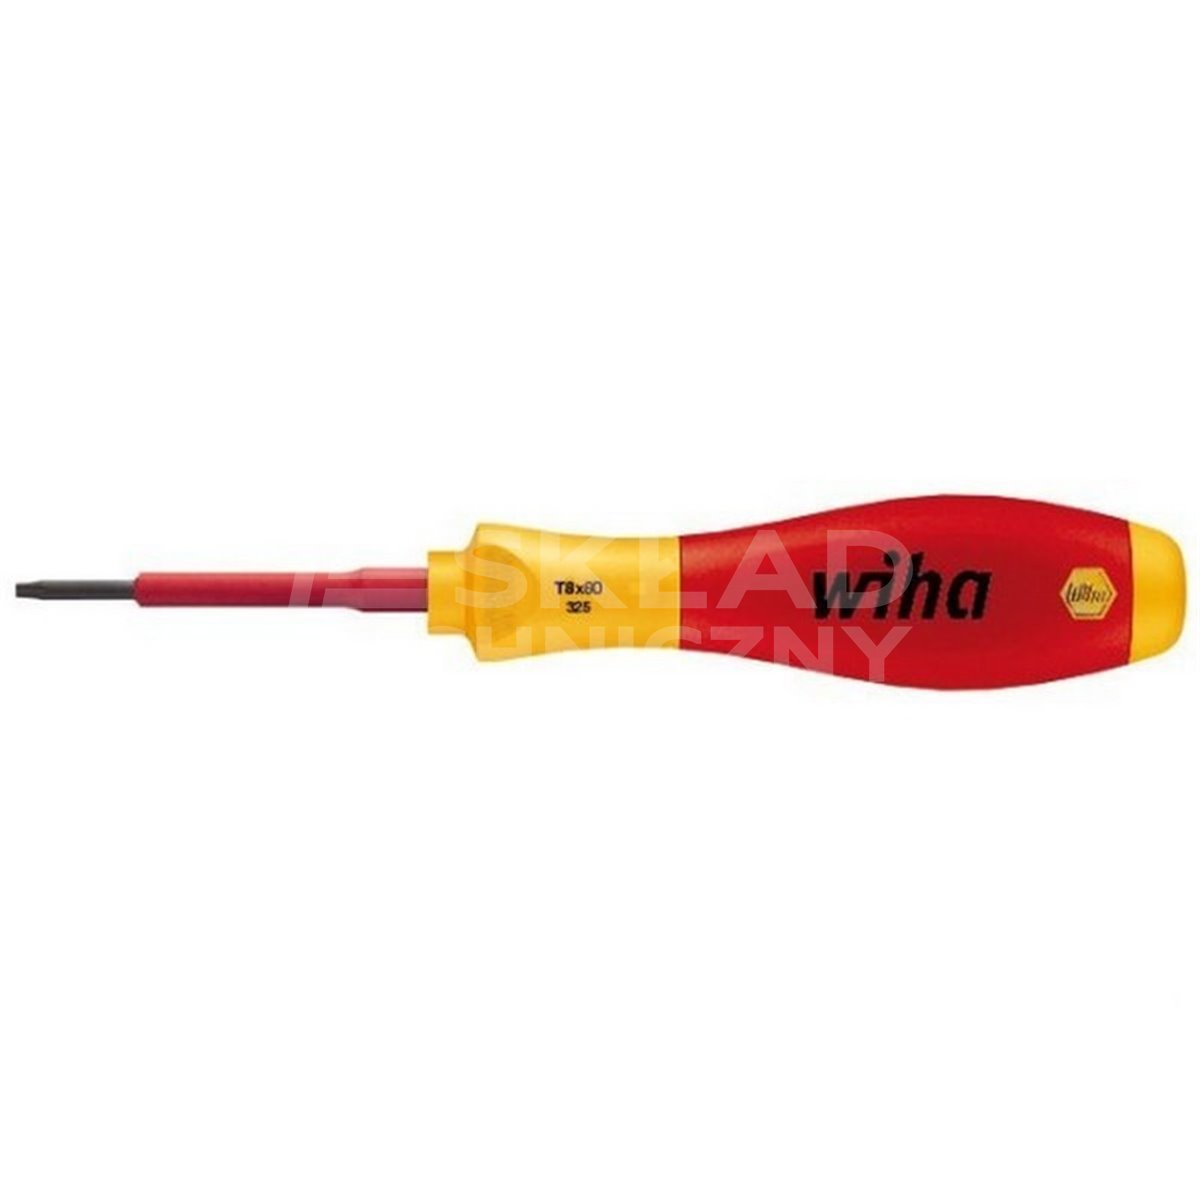 Torx SoftFinish electric VDE 325 T5 60mm screwdriver by Wiha 03760.